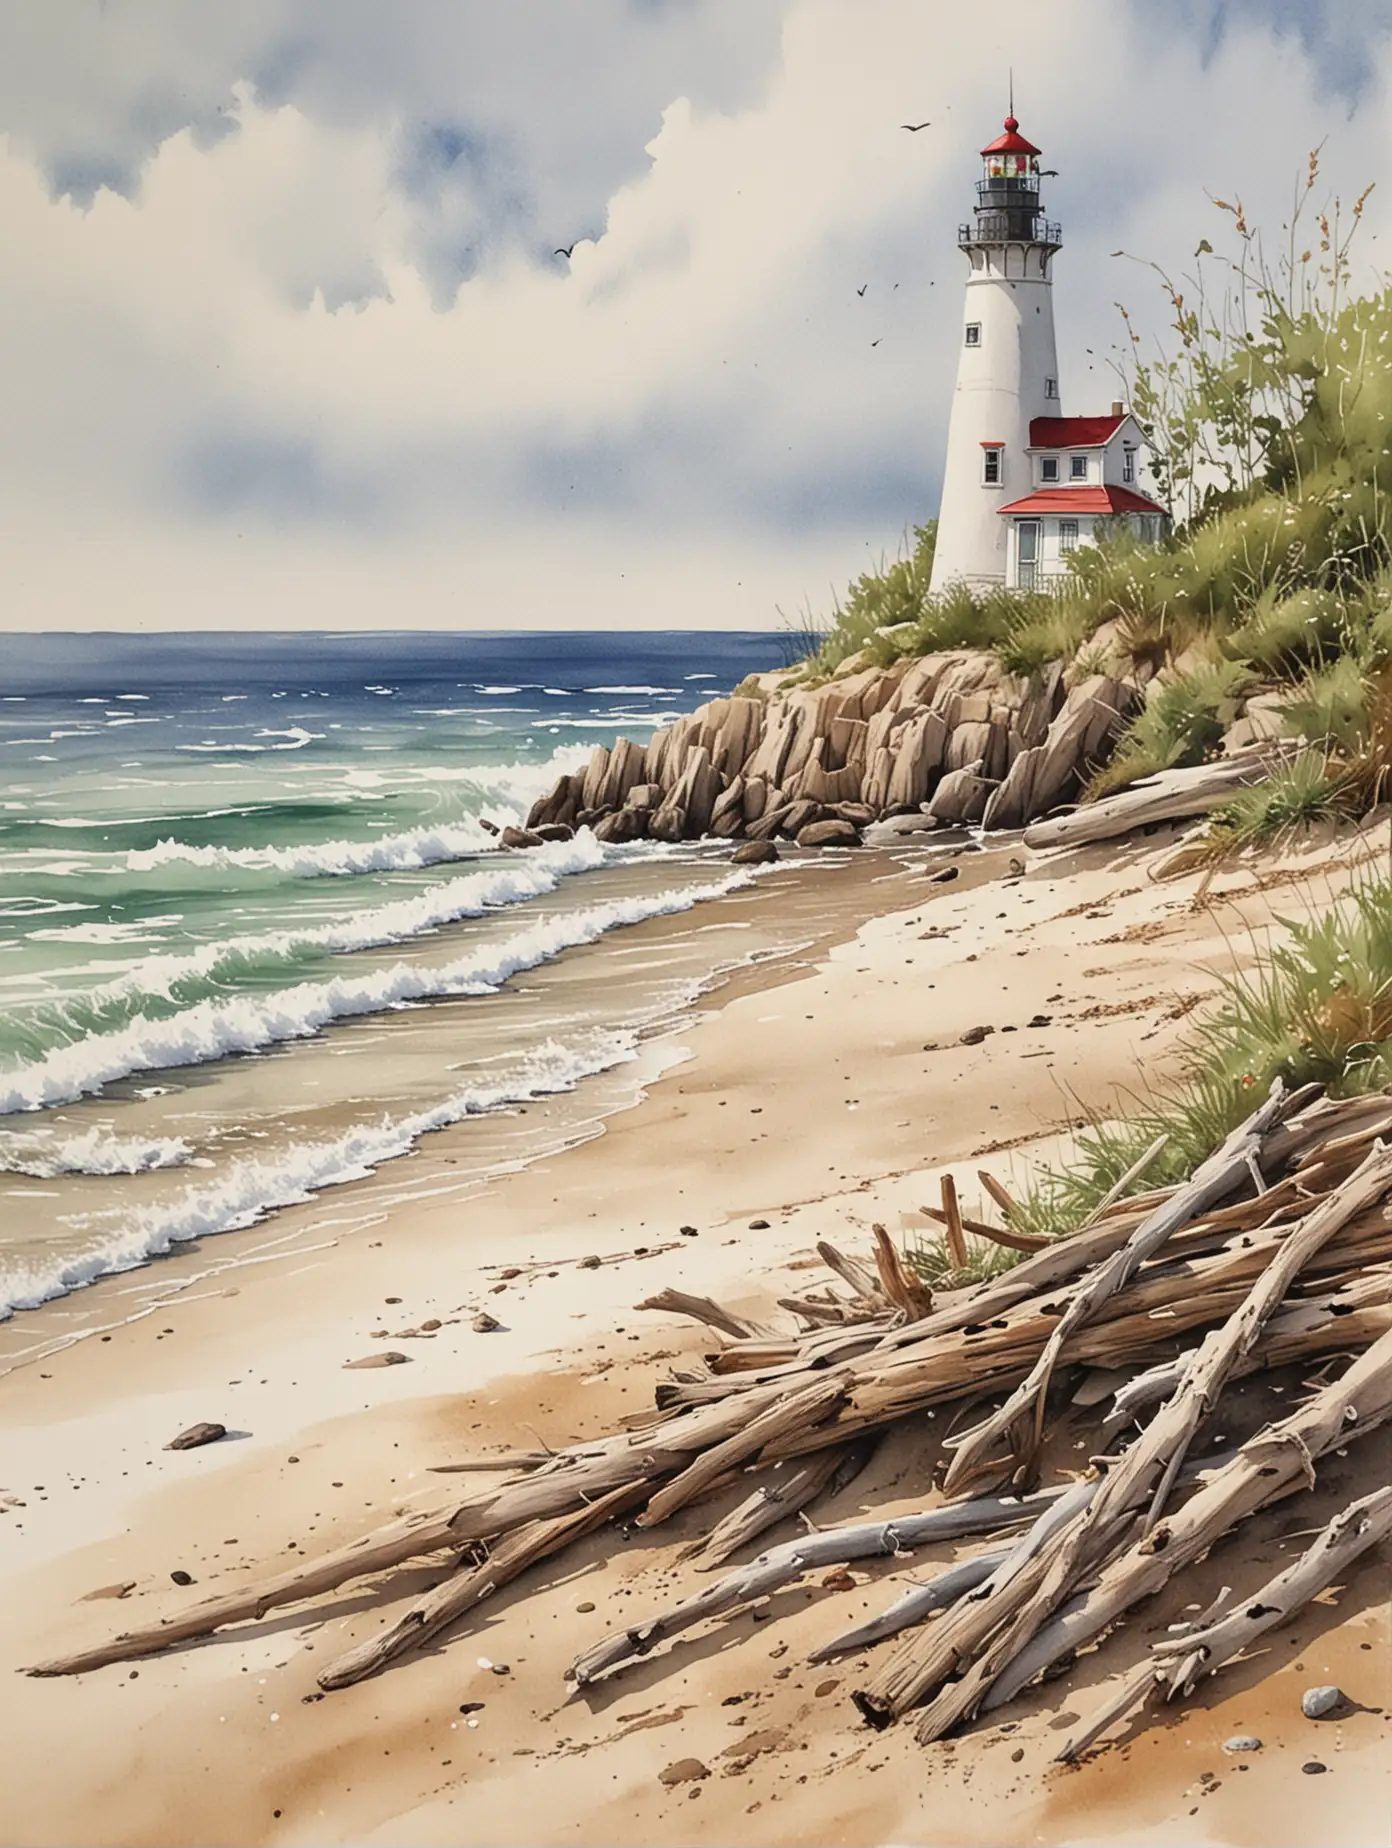 Tranquil Watercolor Painting of Cape Cod Beach with Driftwood and Lighthouse